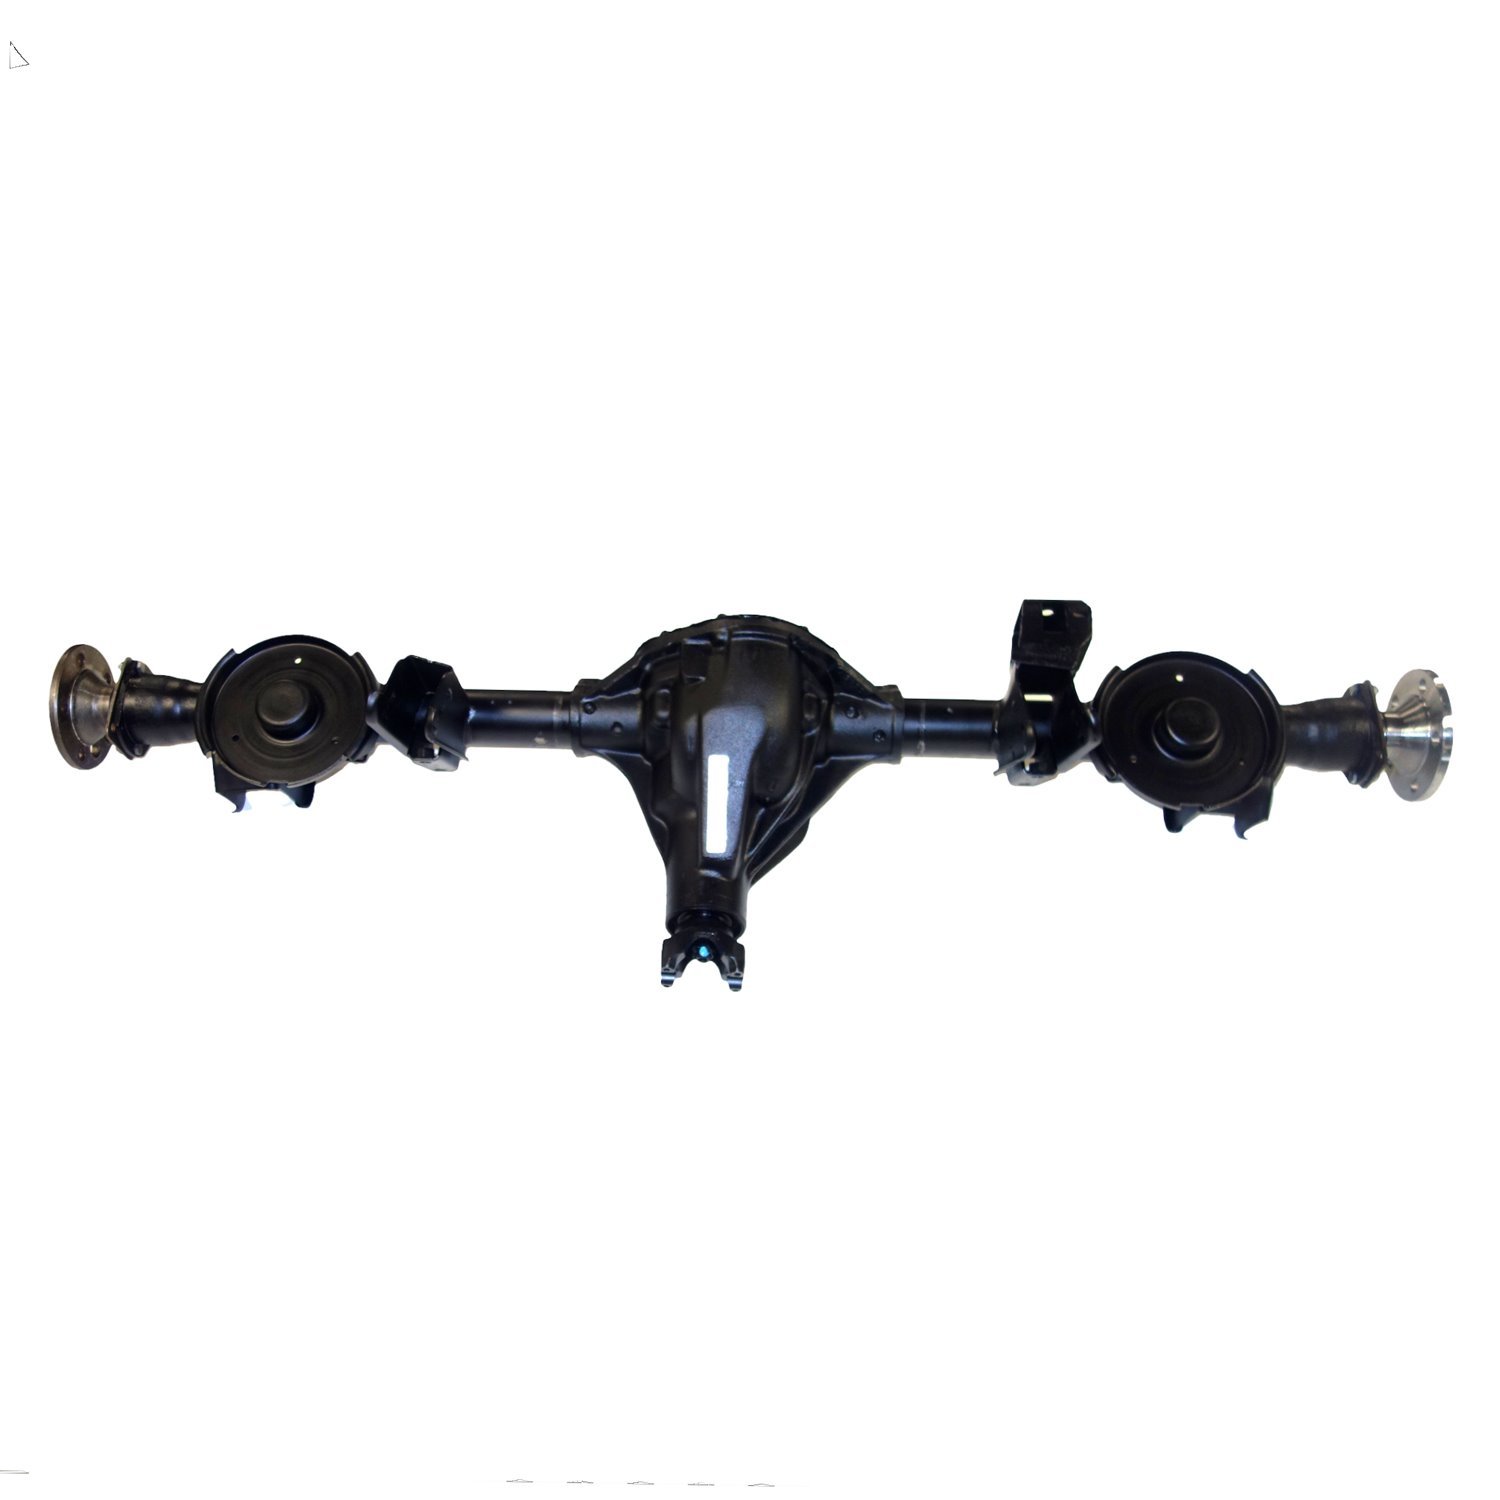 Remanufactured Axle Assy for Dana 44 99-04 Grand